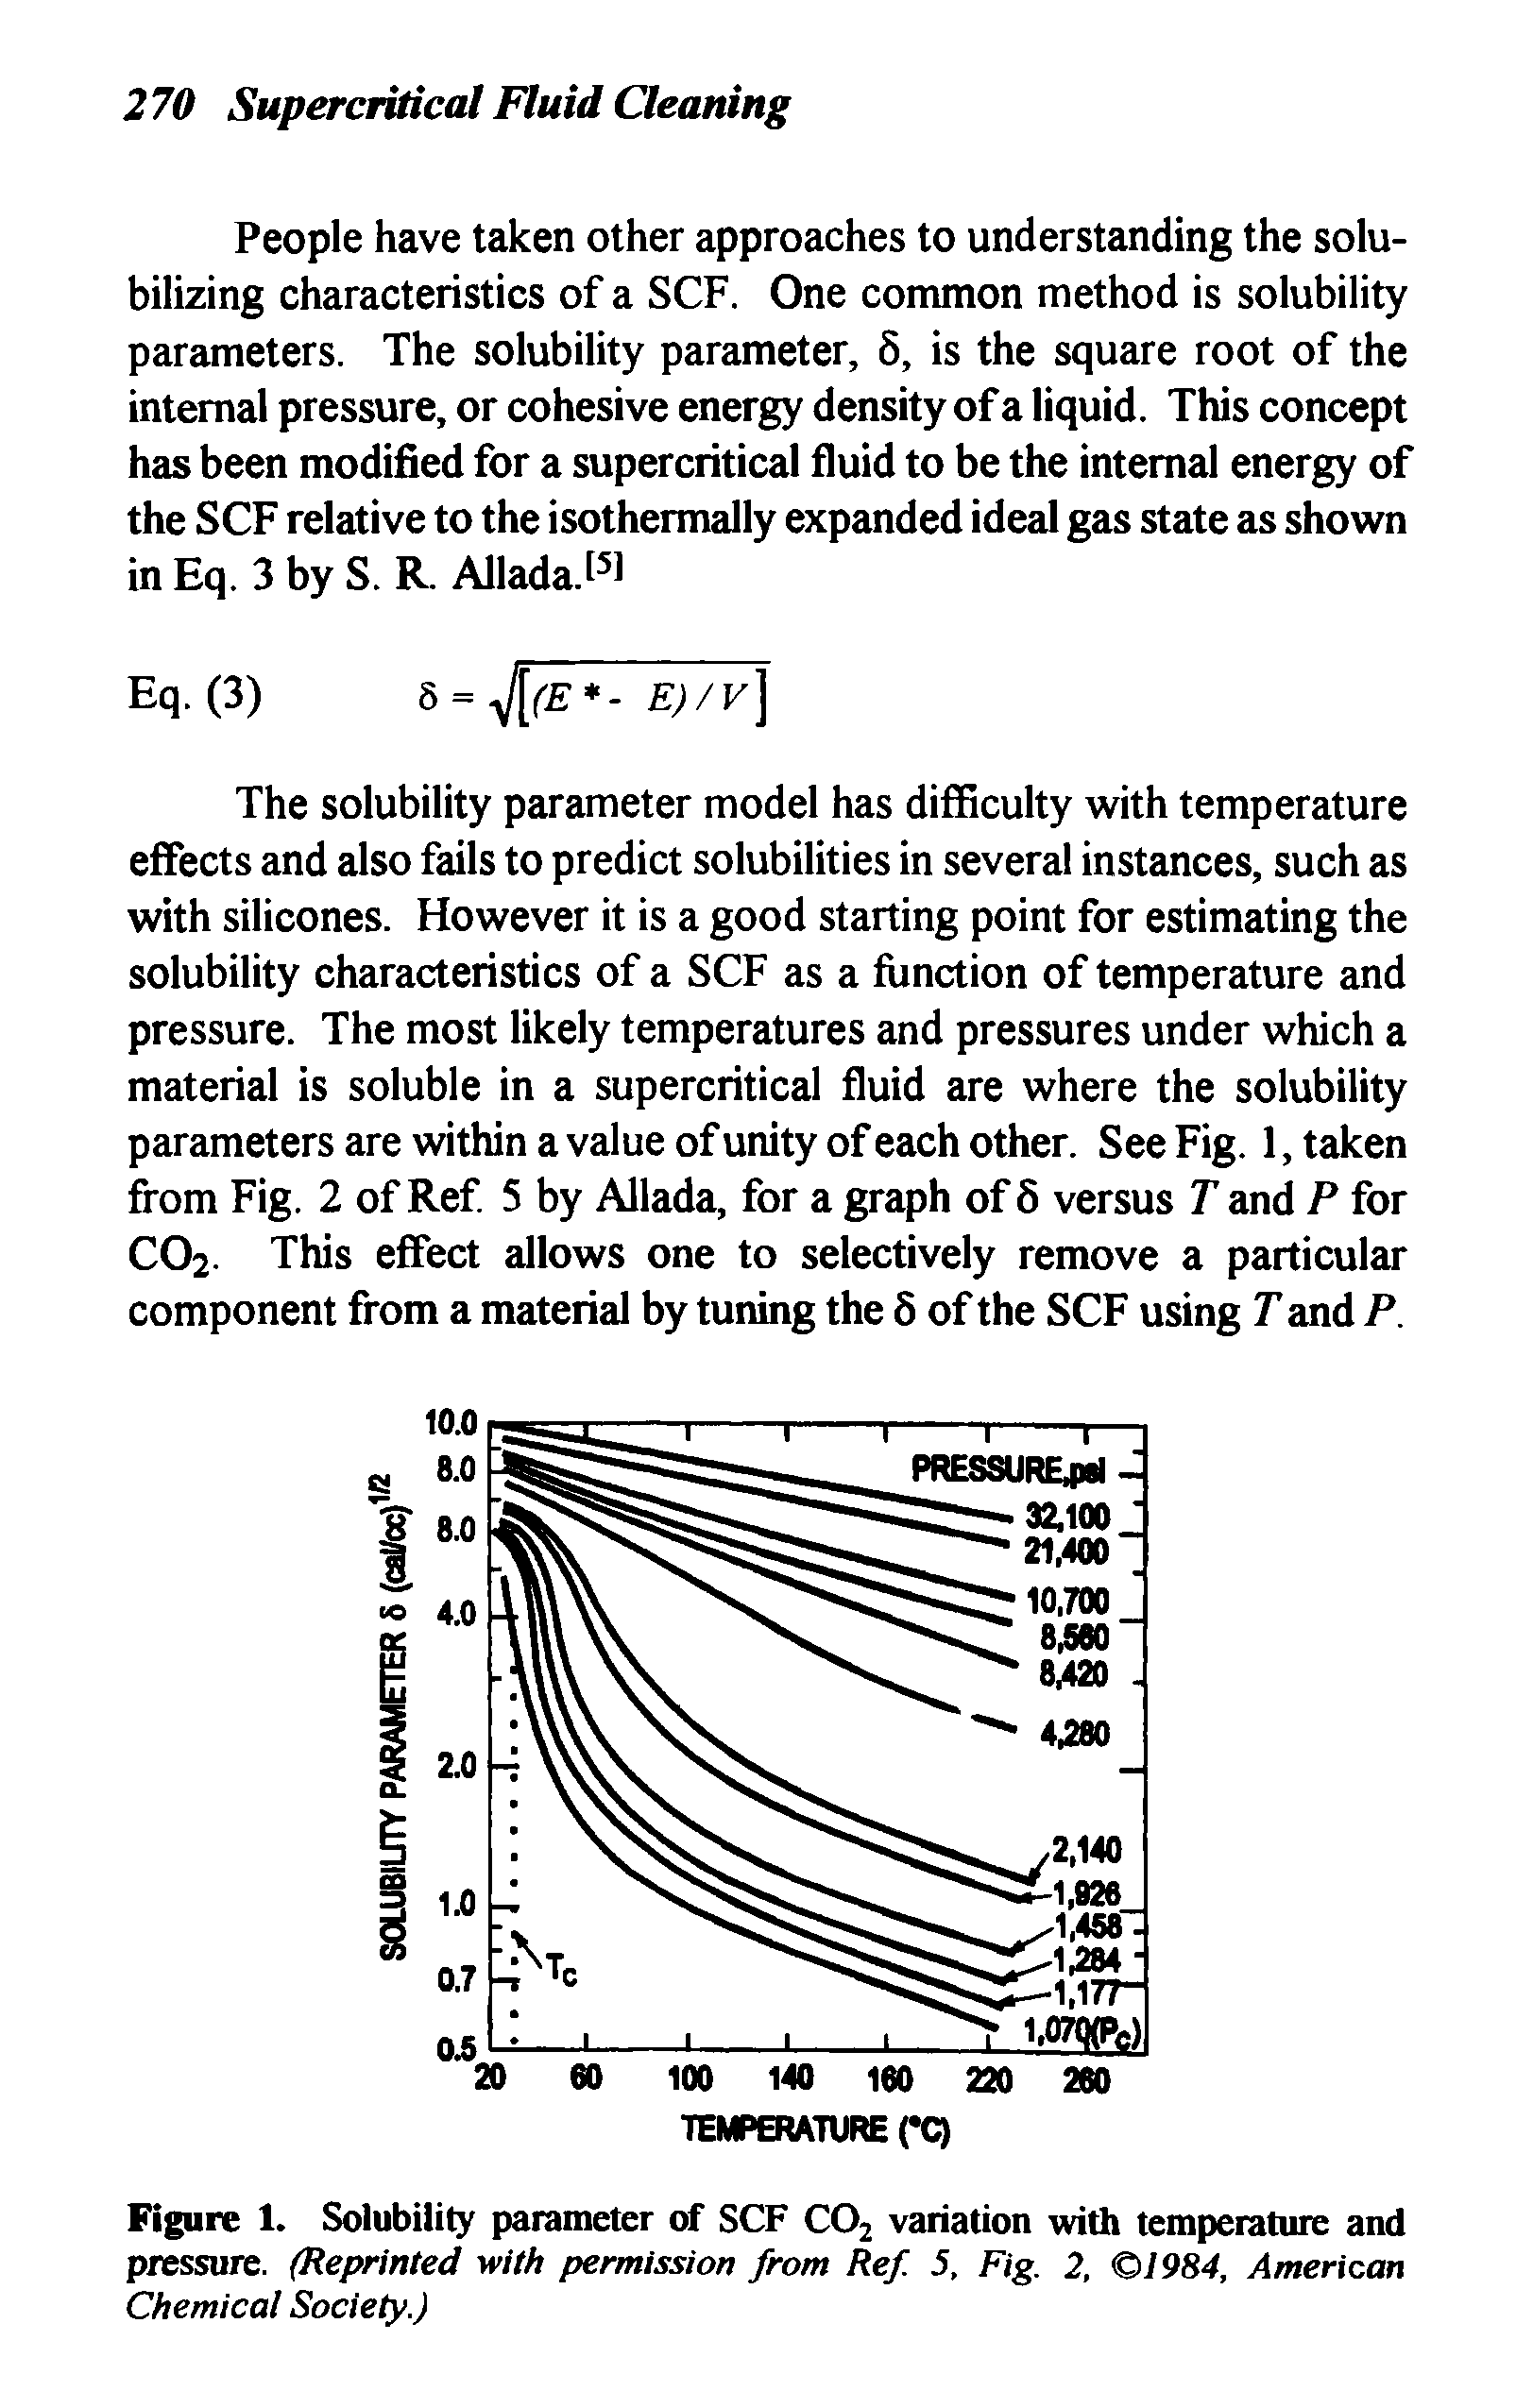 Figure 1. Solubility parameter of SCF COj variation with temperature and pressure. (Reprinted with permission from Ref. 5, Fig. 2, 1984, American Chemical Society.)...